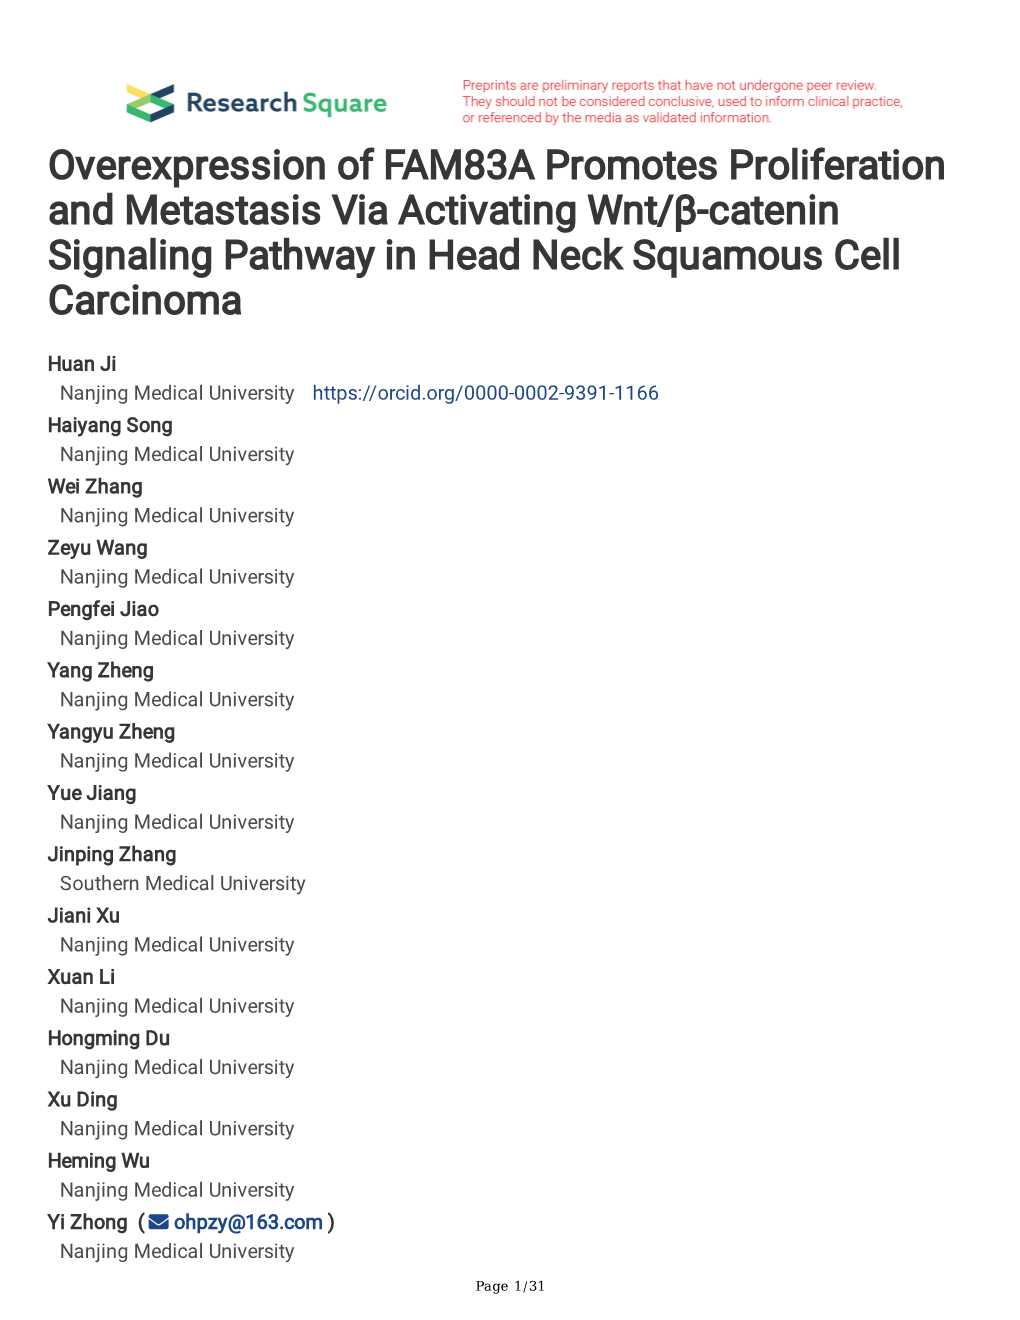 Overexpression of FAM83A Promotes Proliferation and Metastasis Via Activating Wnt/Β-Catenin Signaling Pathway in Head Neck Squamous Cell Carcinoma